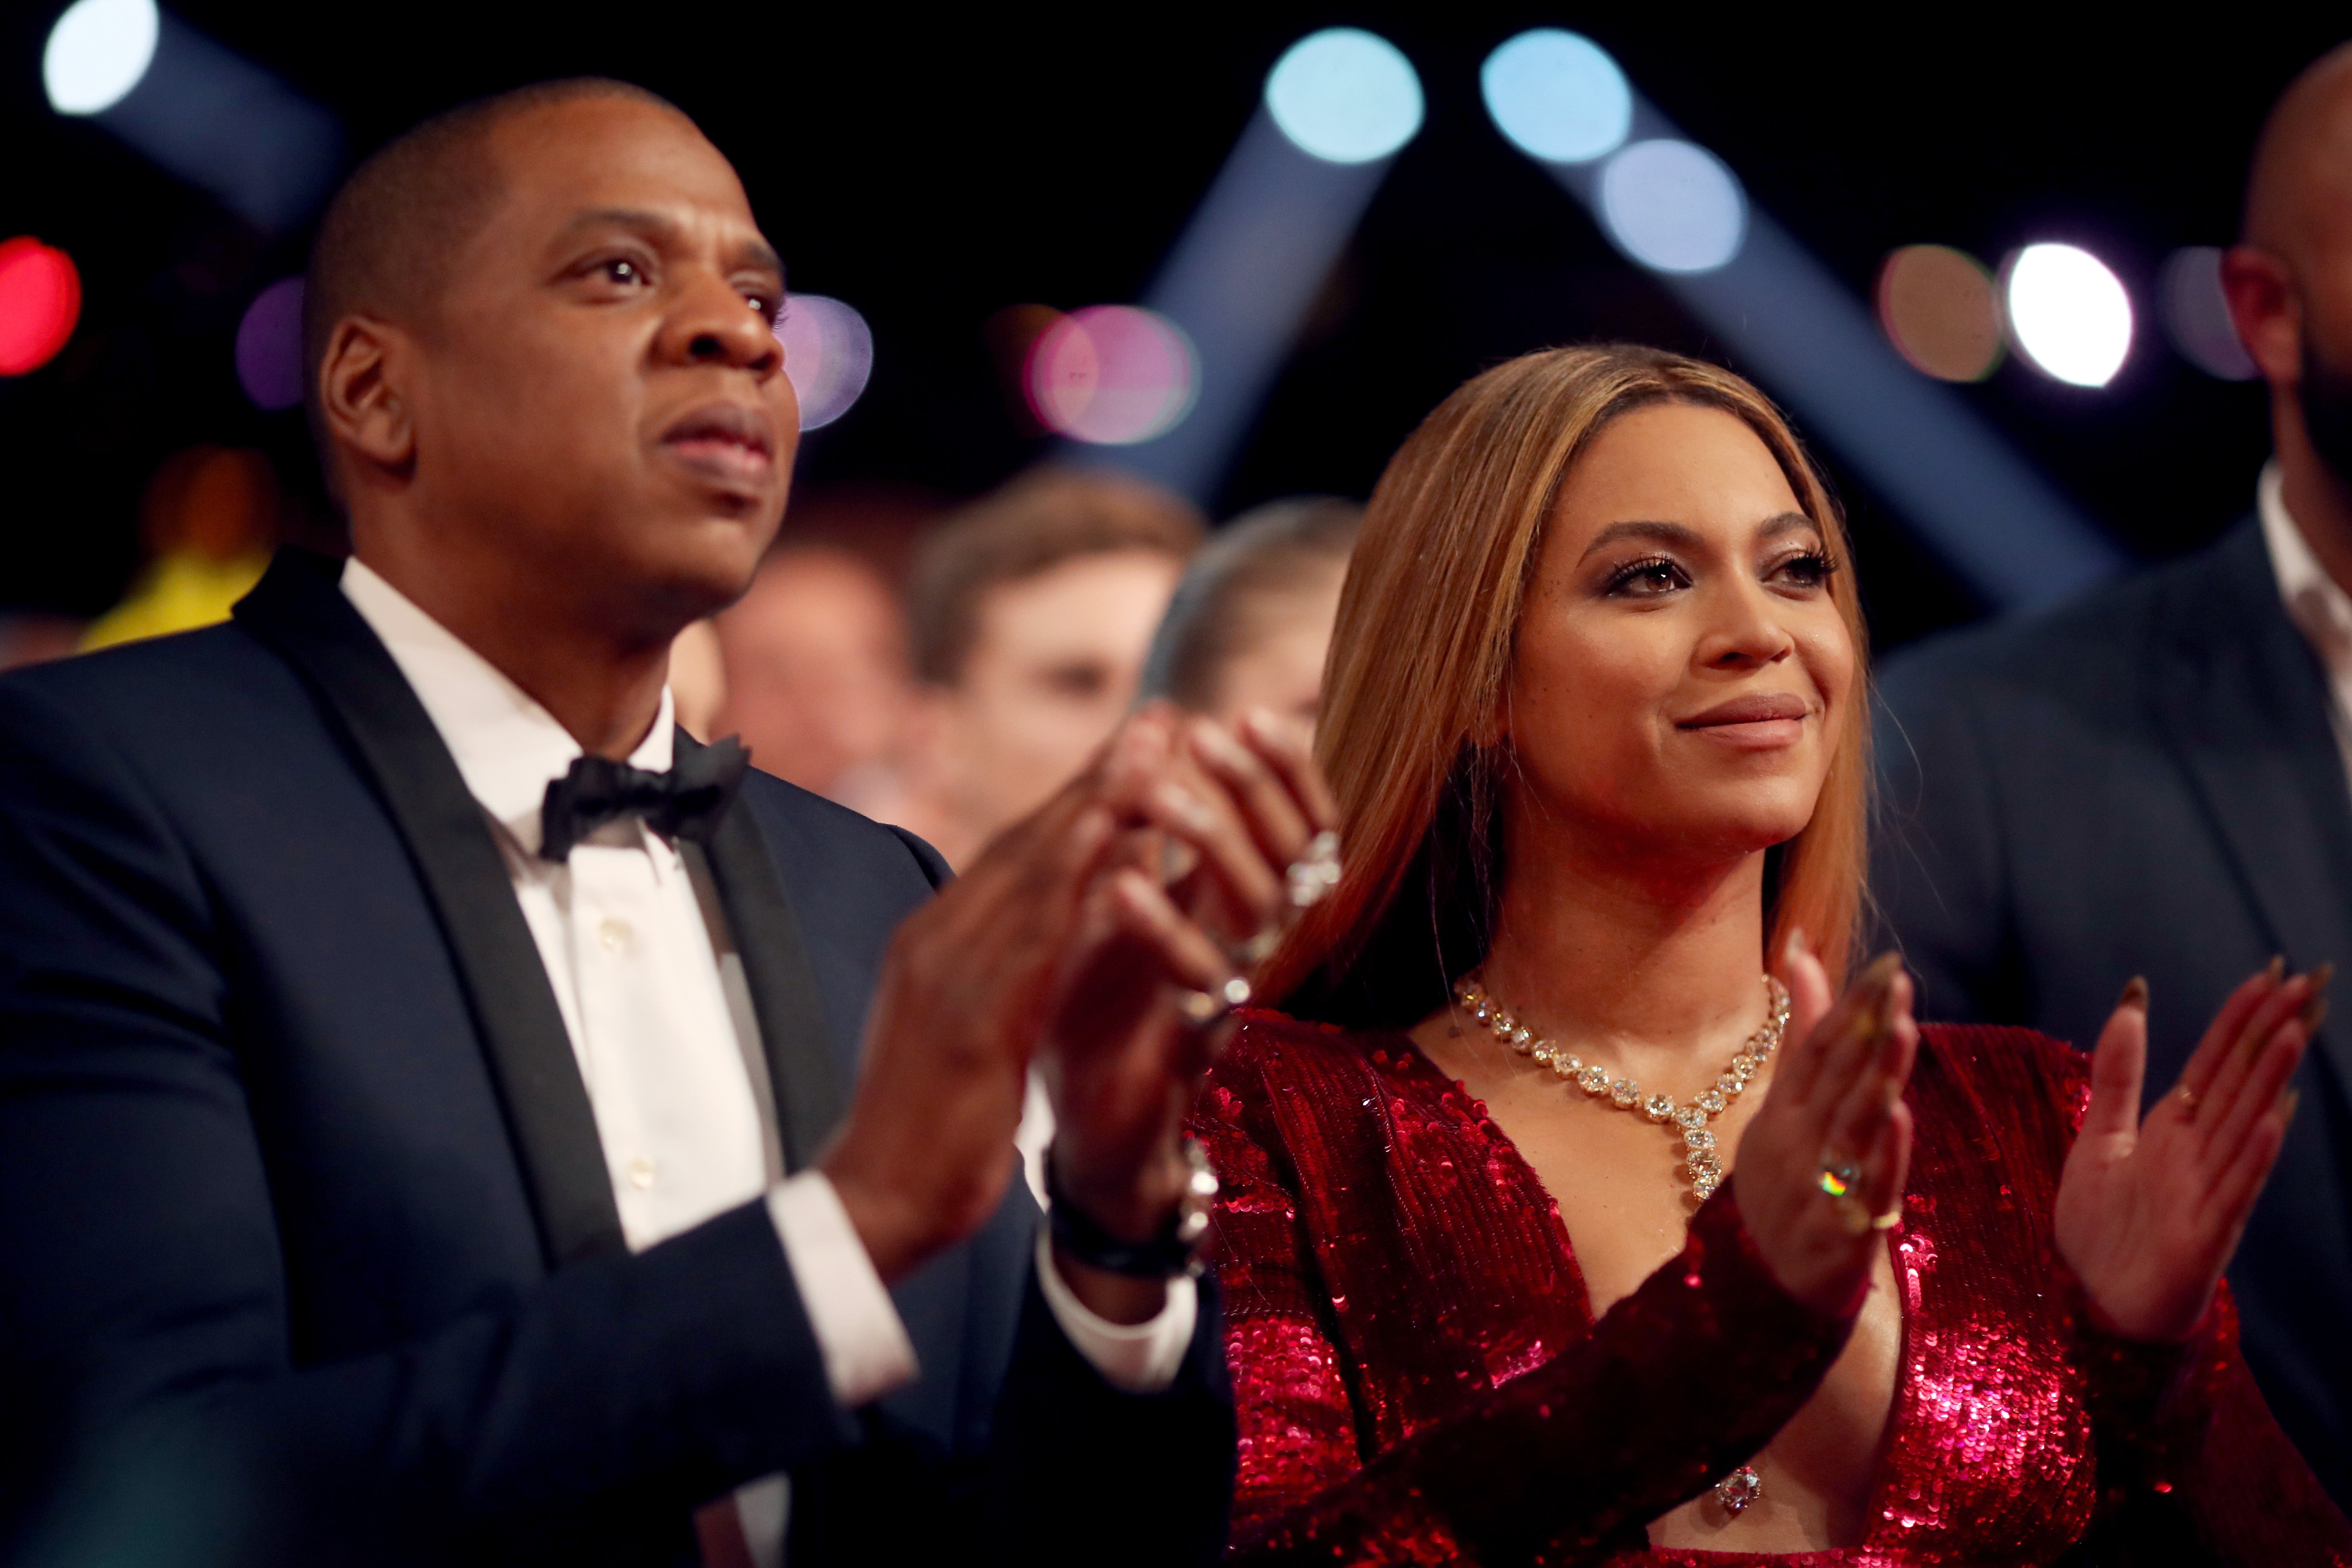 Jay-Z is now the most Grammy-nominated artist ever